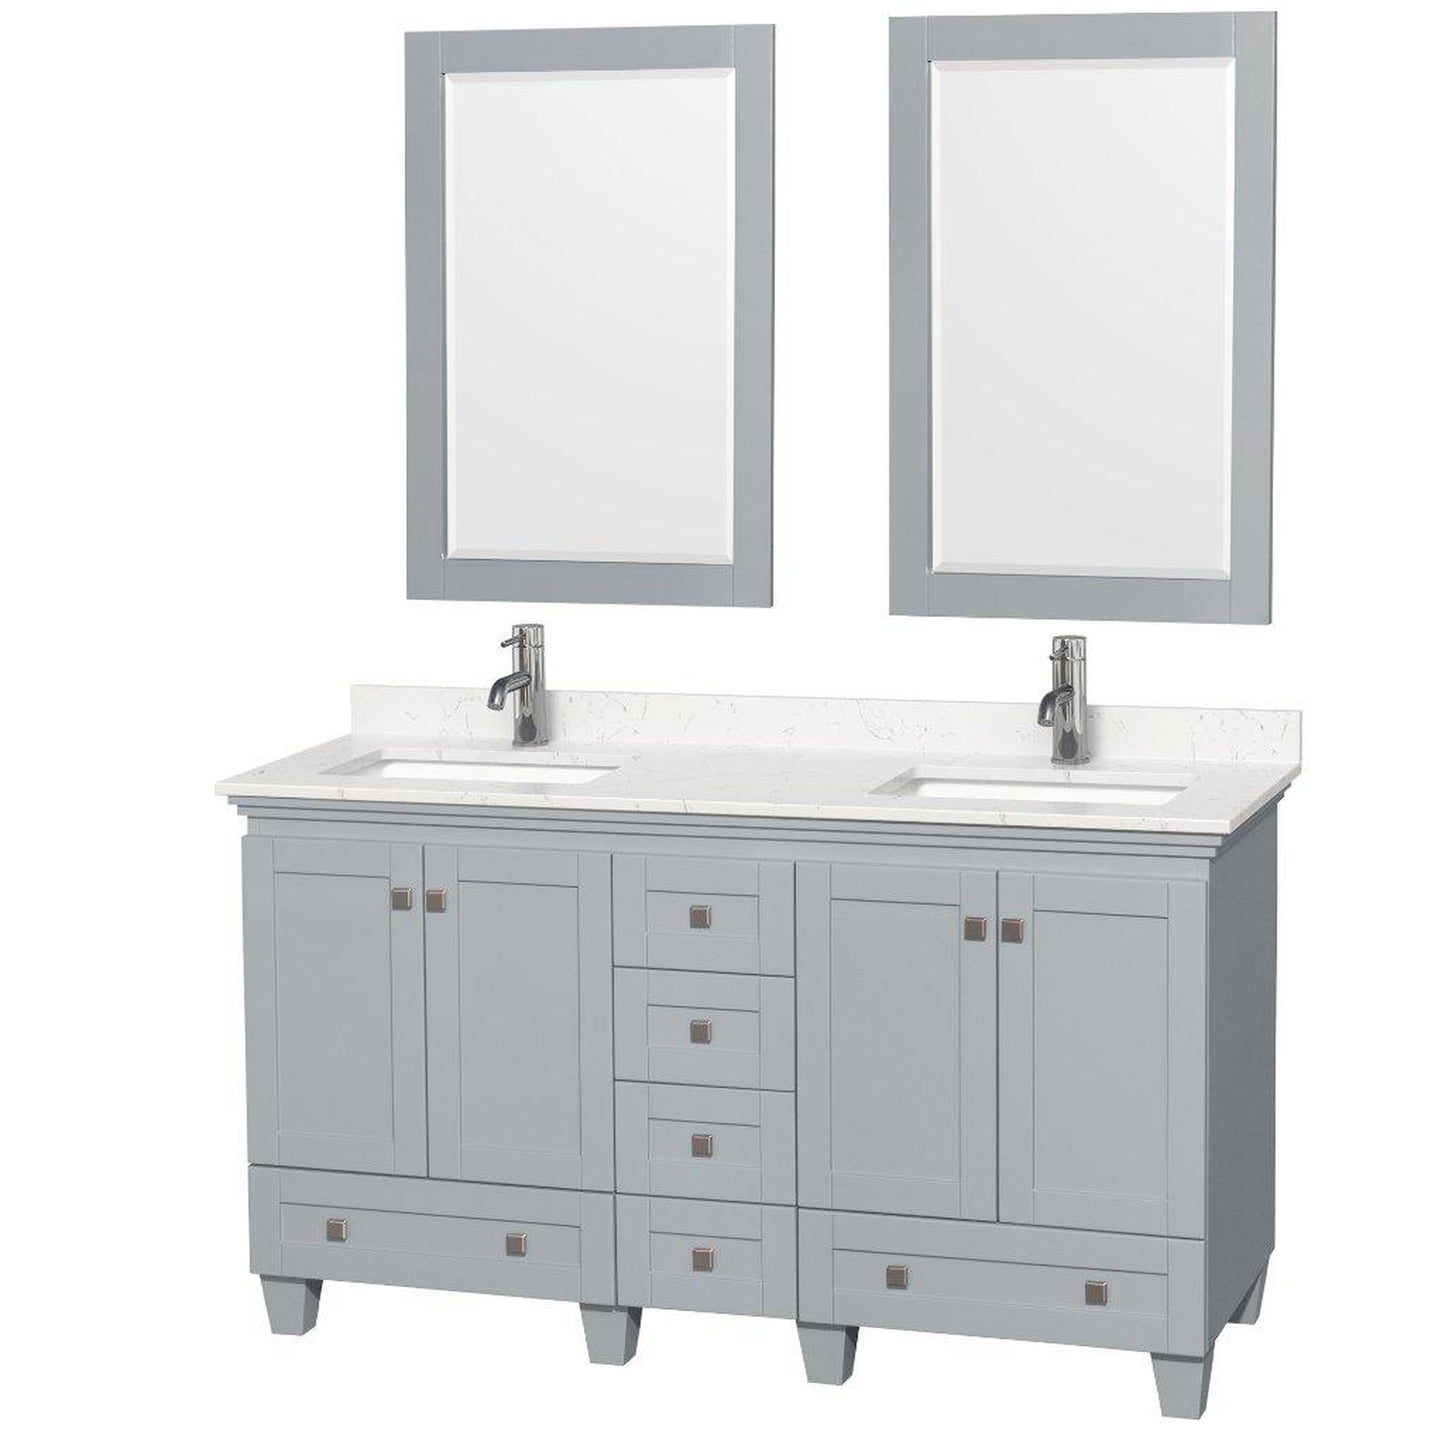 Wyndham Collection Acclaim 60" Double Bathroom Oyster Gray Vanity With Light-Vein Carrara Cultured Marble Countertop And Undermount Square Sinks And 2 Set Of 24" Mirror